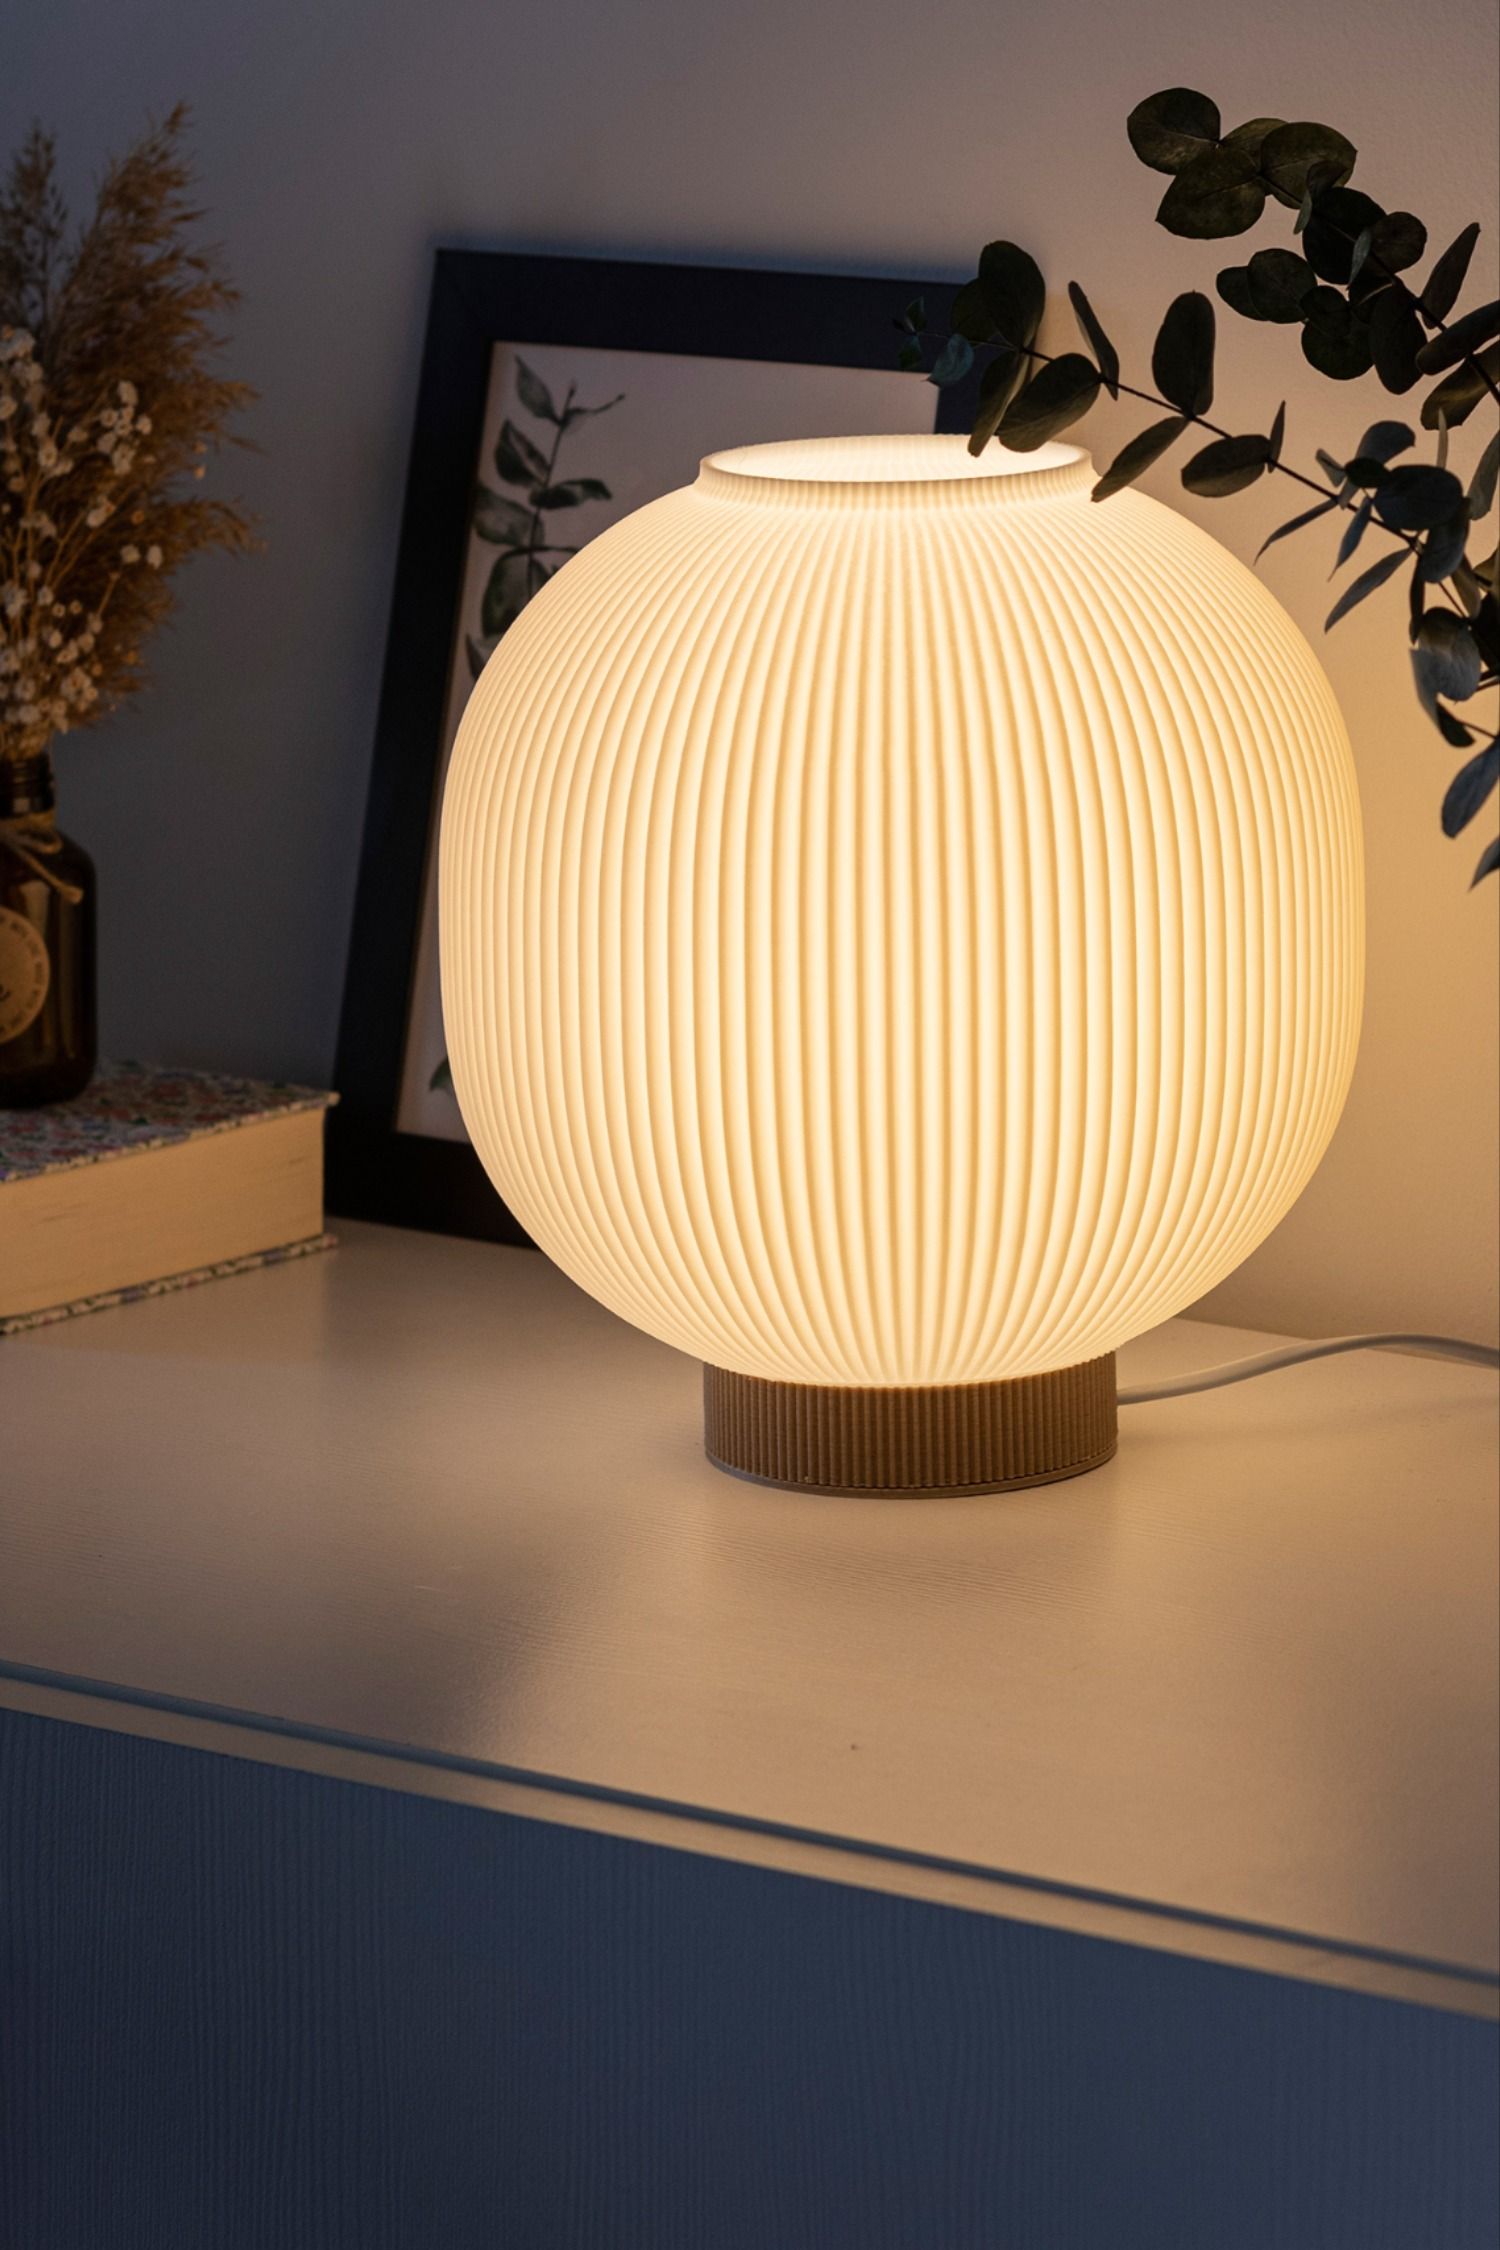 Bedside Lamps For Bedrooms The Best Lighting Solution for Your Bedroom That You Need to Know About